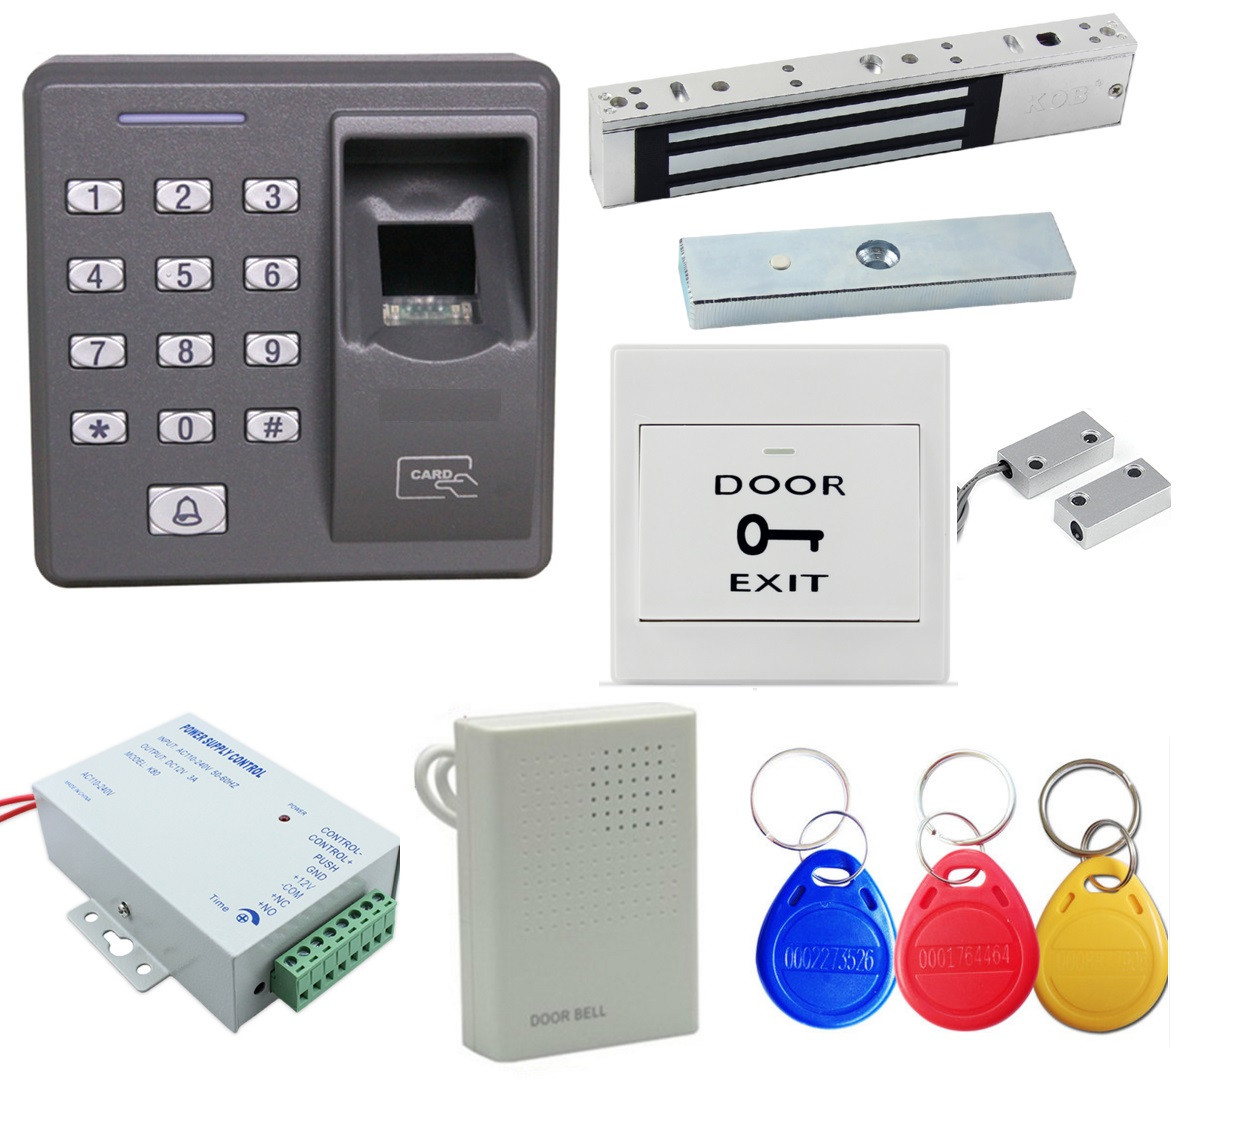 Fingerprint And ID Card Reader Access Control System Kit With Magnetic Door Lock 